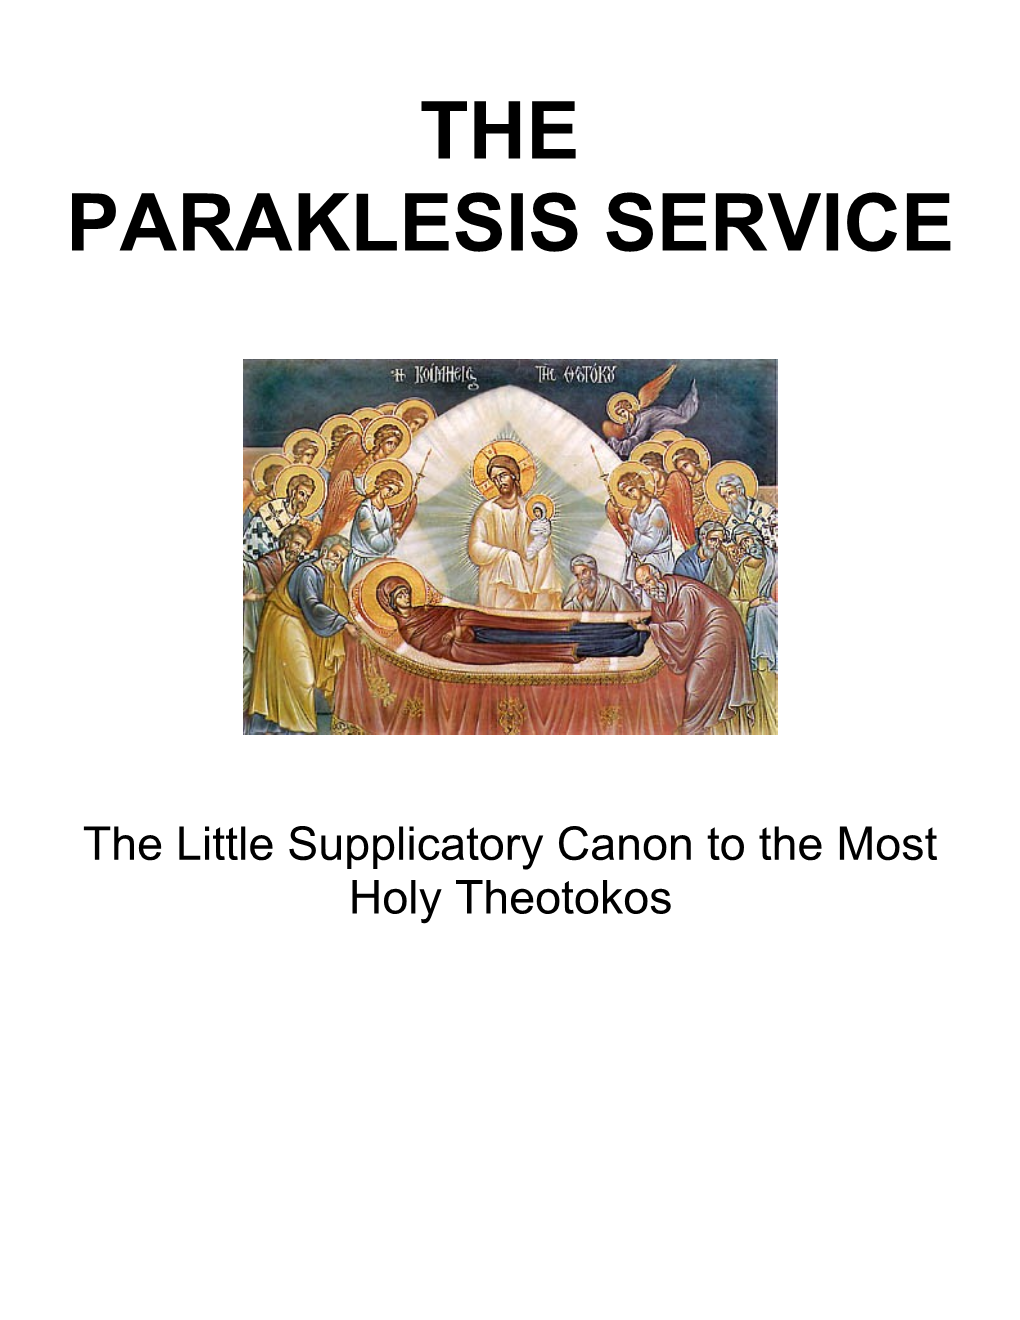 The Little Supplicatory Canon to the Most Holy Theotokos